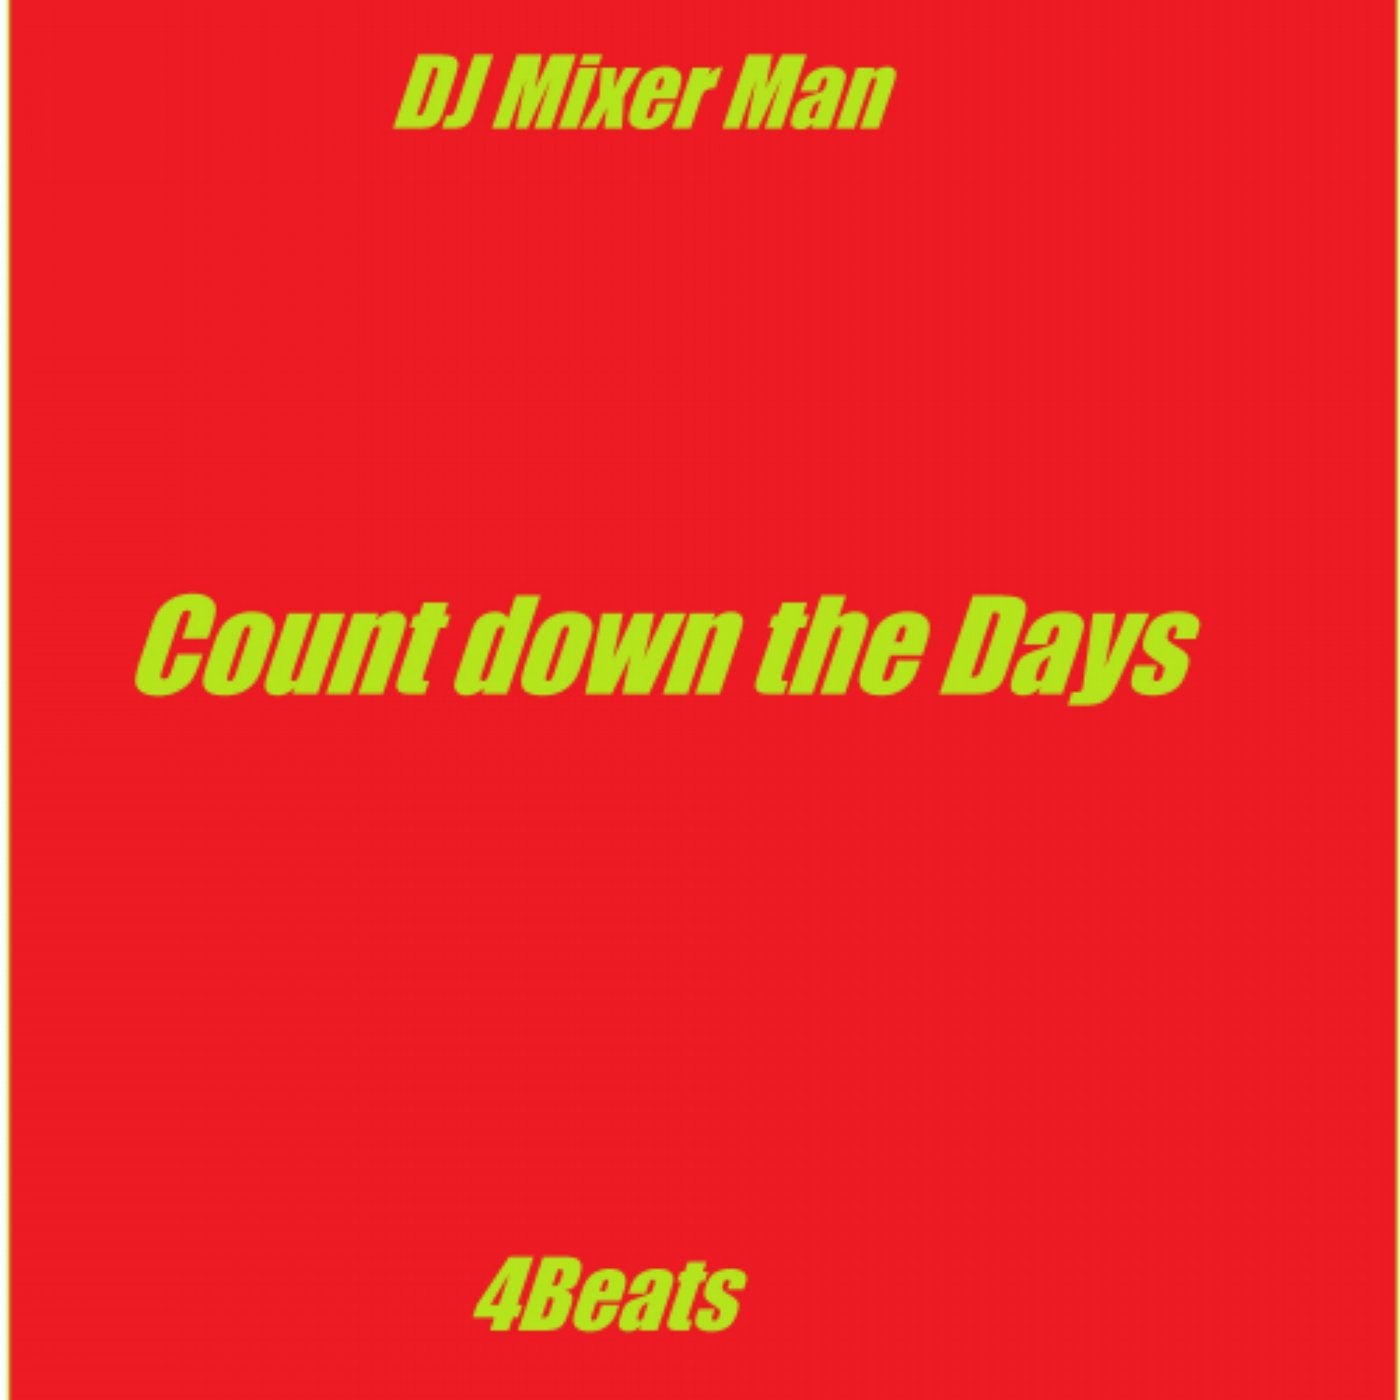 Count Down The Days (PureMix)